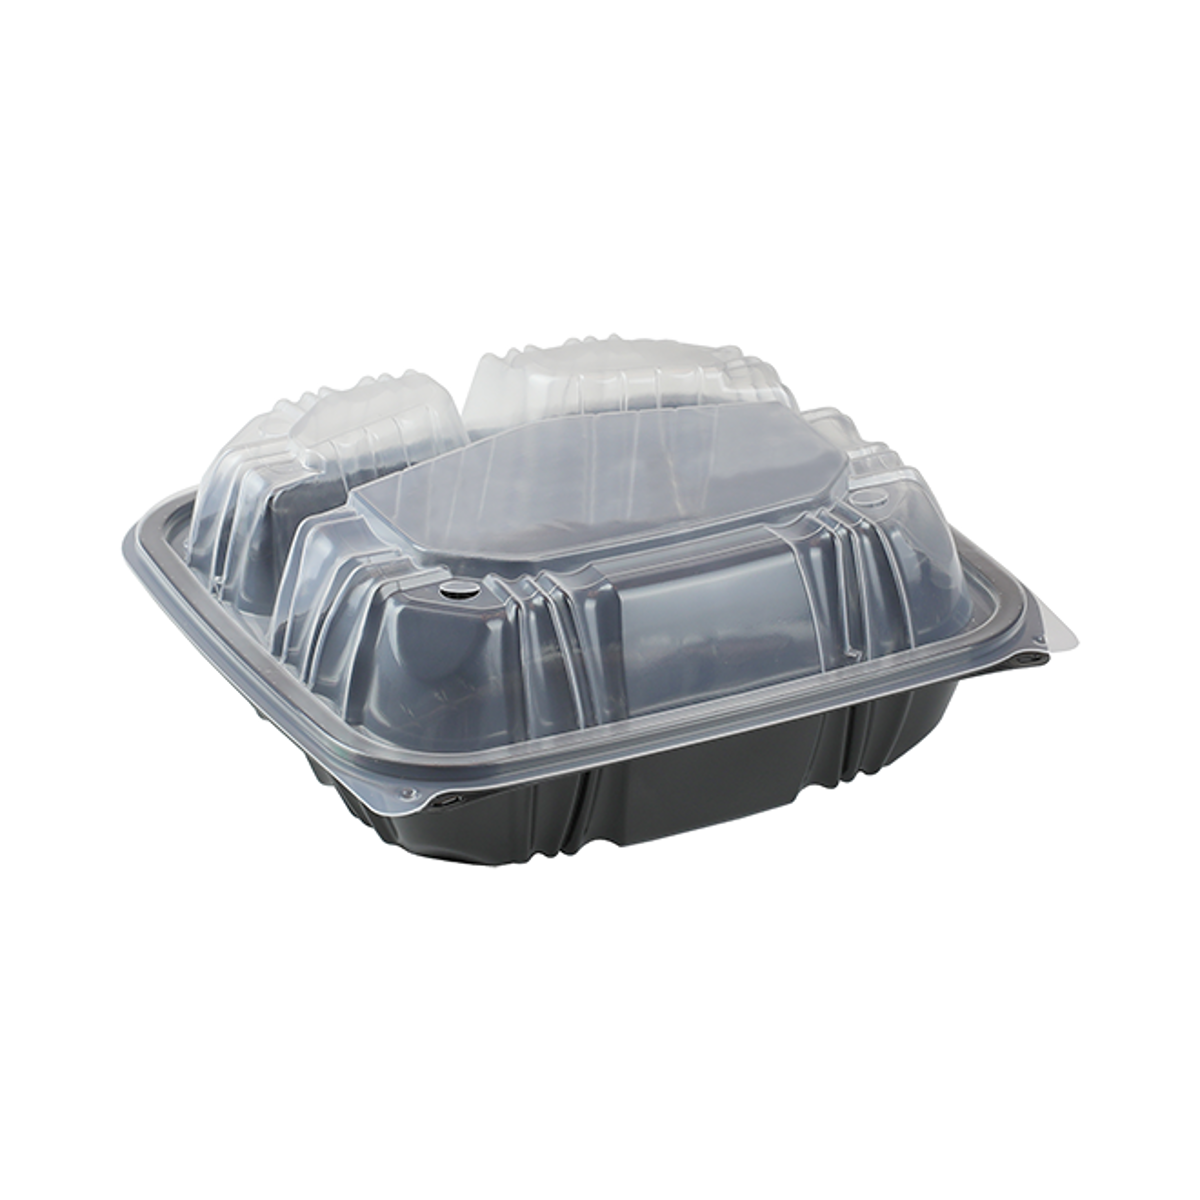 9 x 9 x 3 MFPP 3 Compartment Clear Hinged Take Out Container - Case of 150